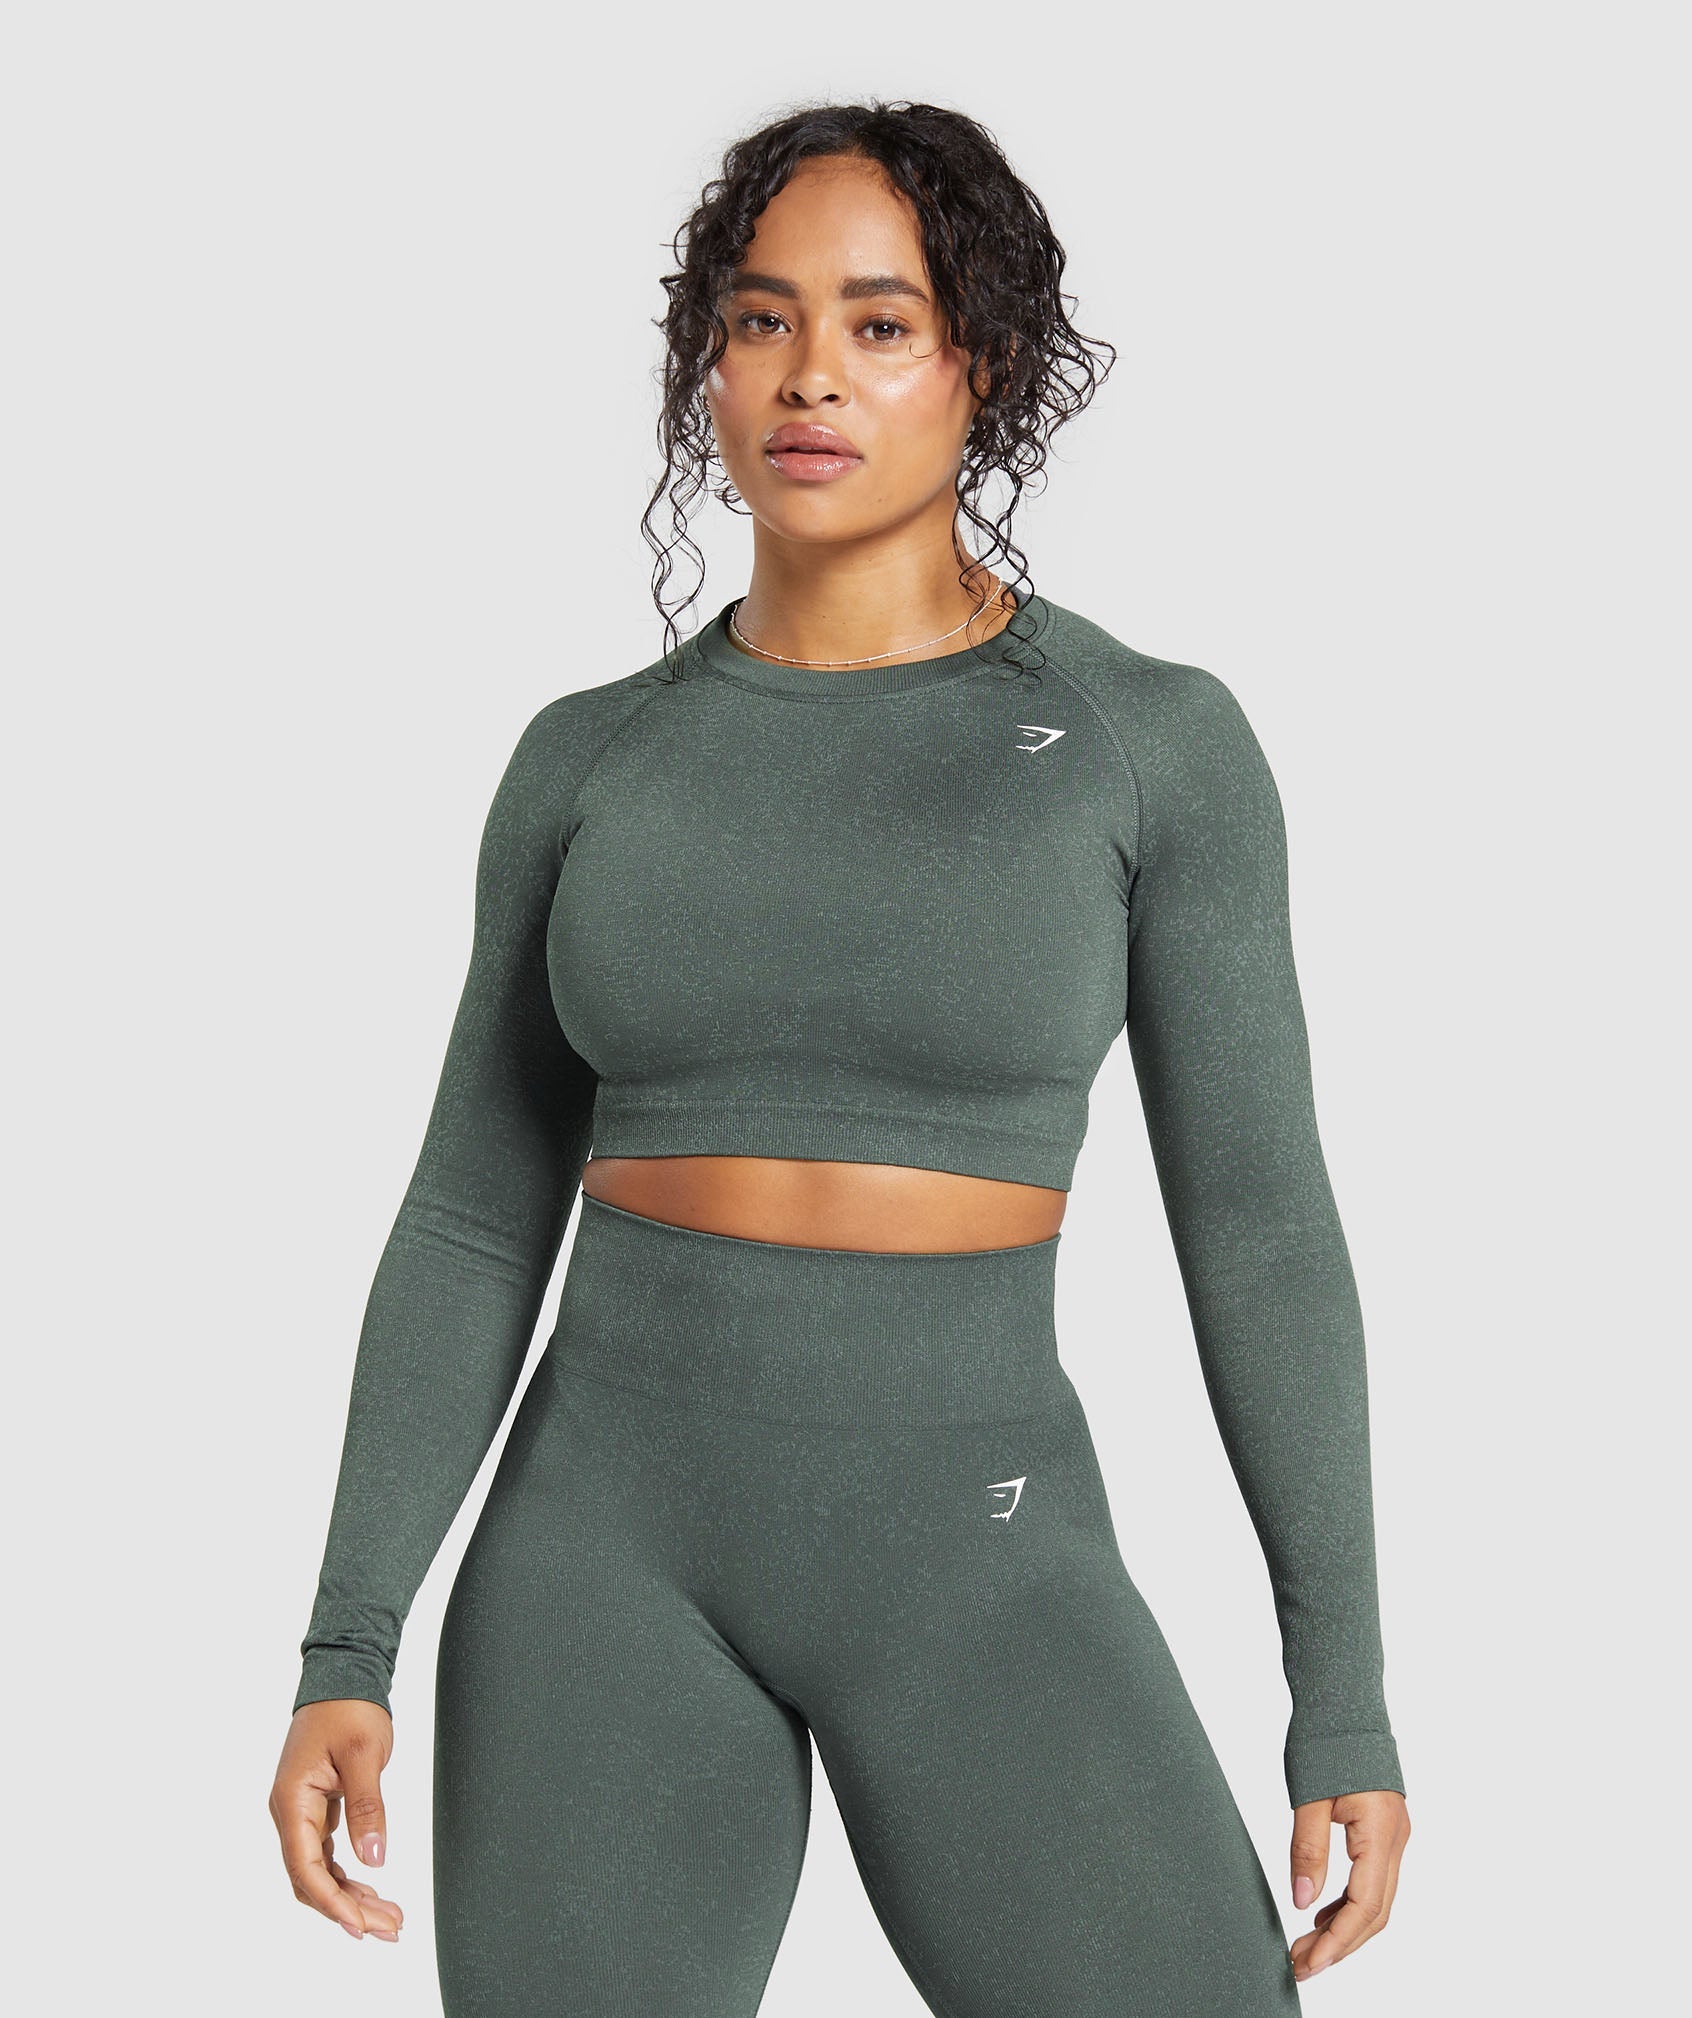 Adapt Fleck Seamless Long Sleeve Crop Top in {{variantColor} is out of stock